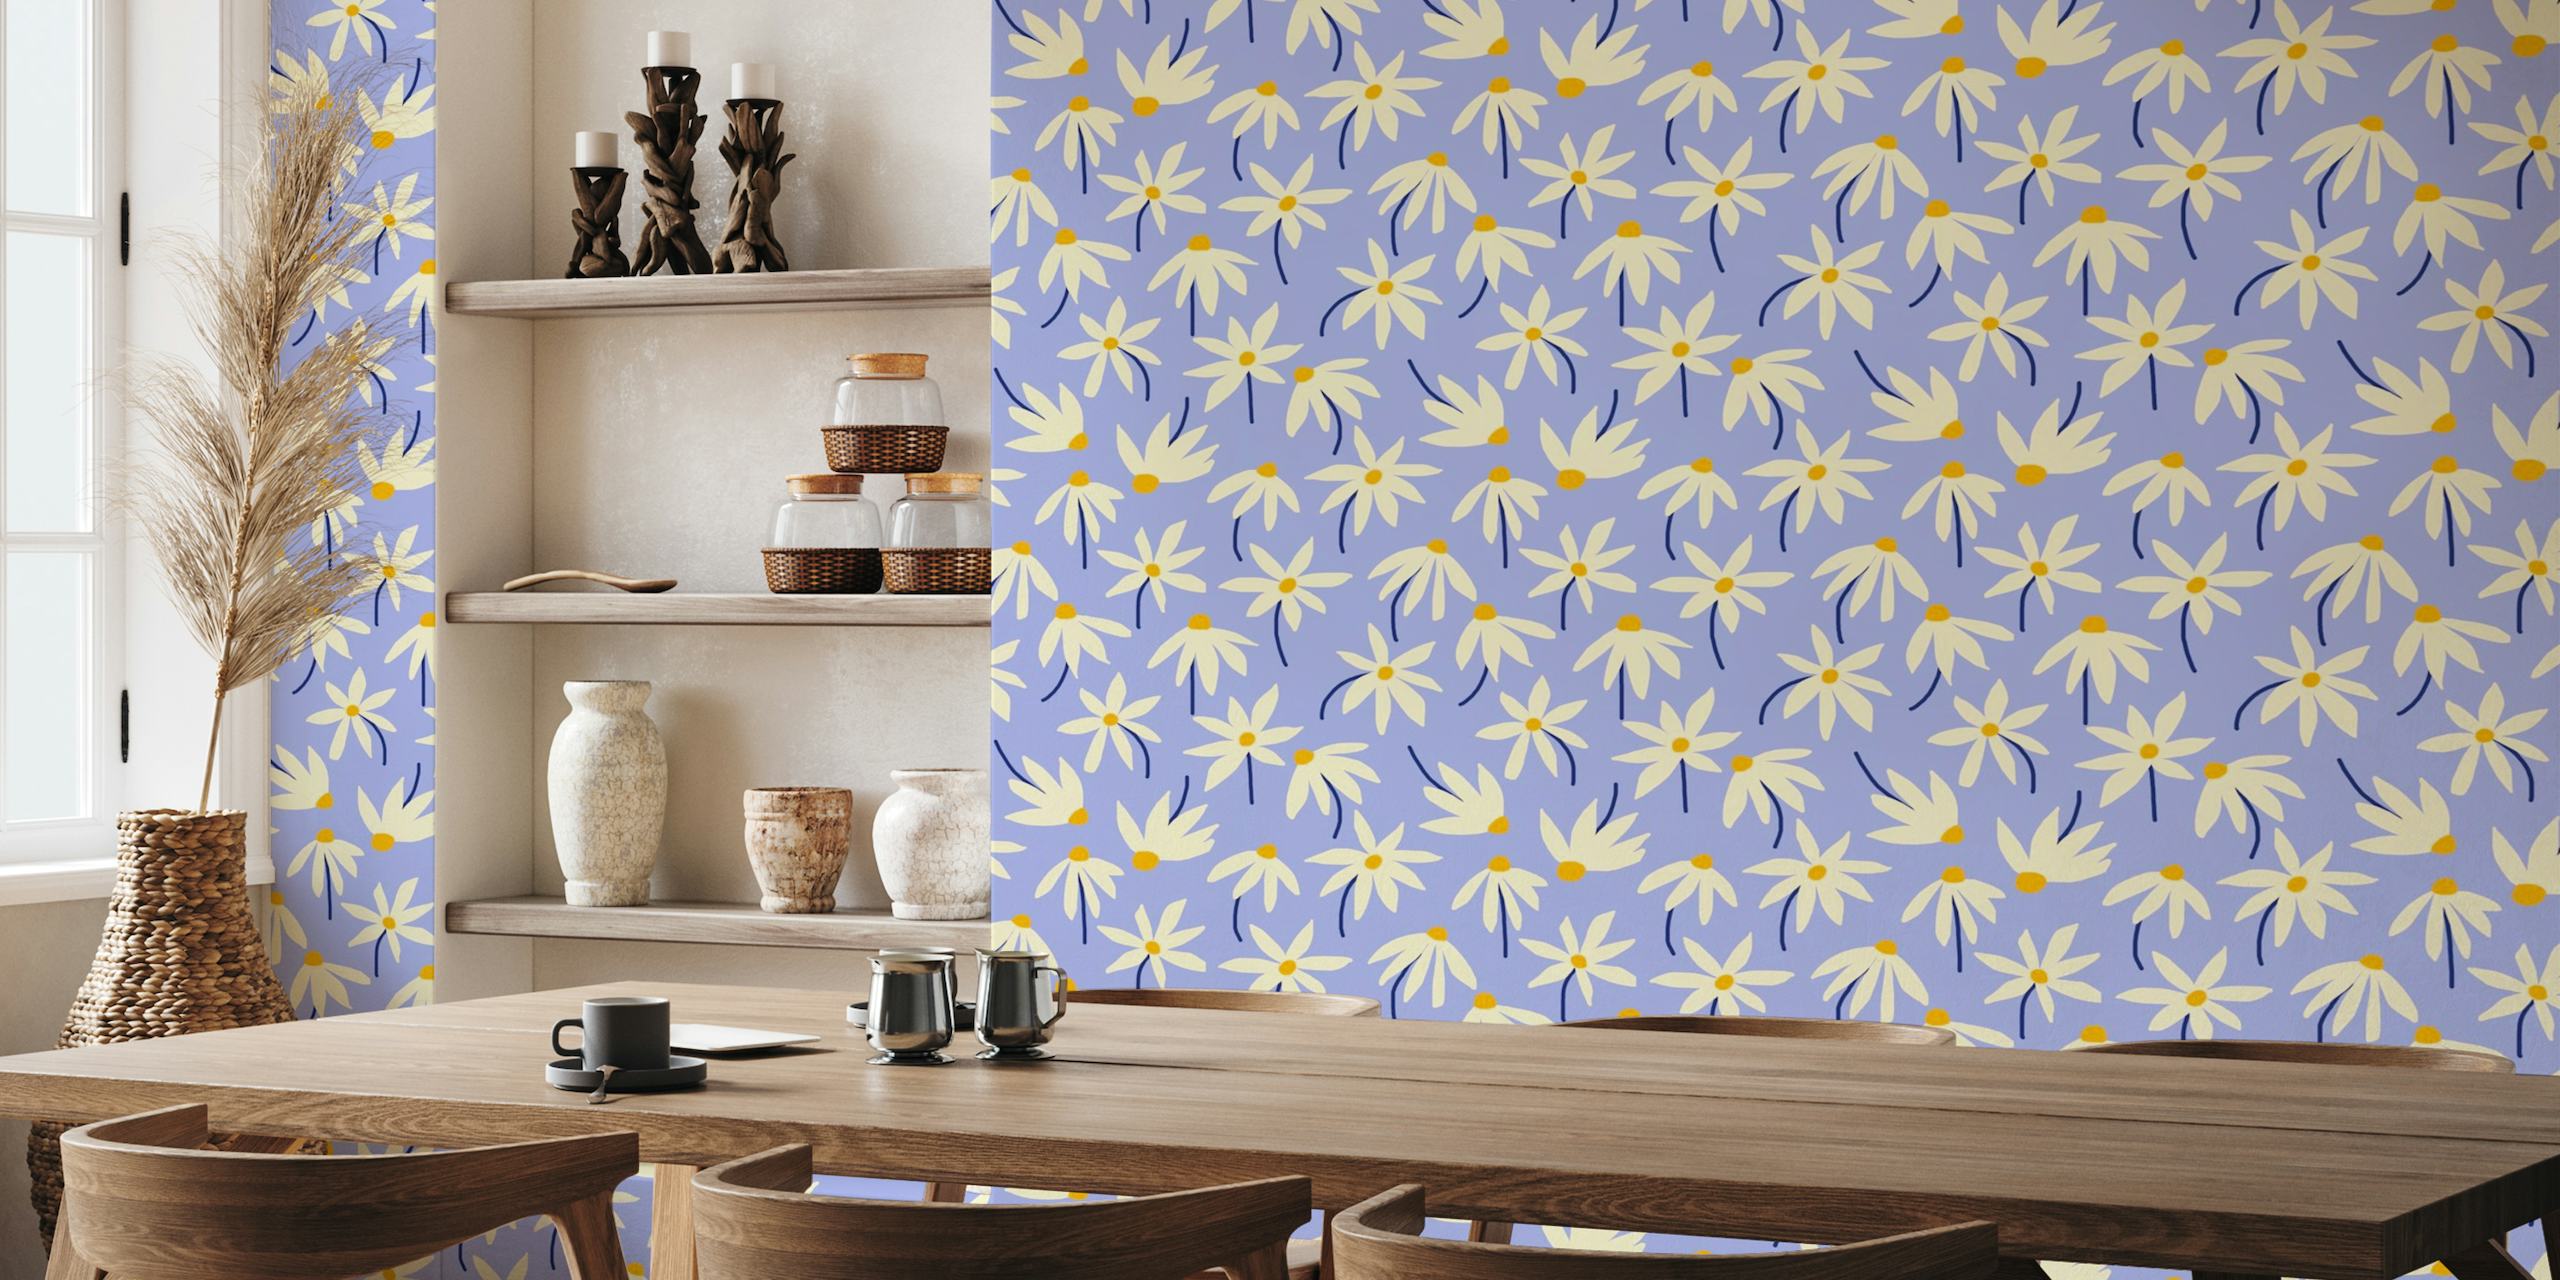 Drifting Daisies Pattern #2 - periwinkle yellow ταπετσαρία